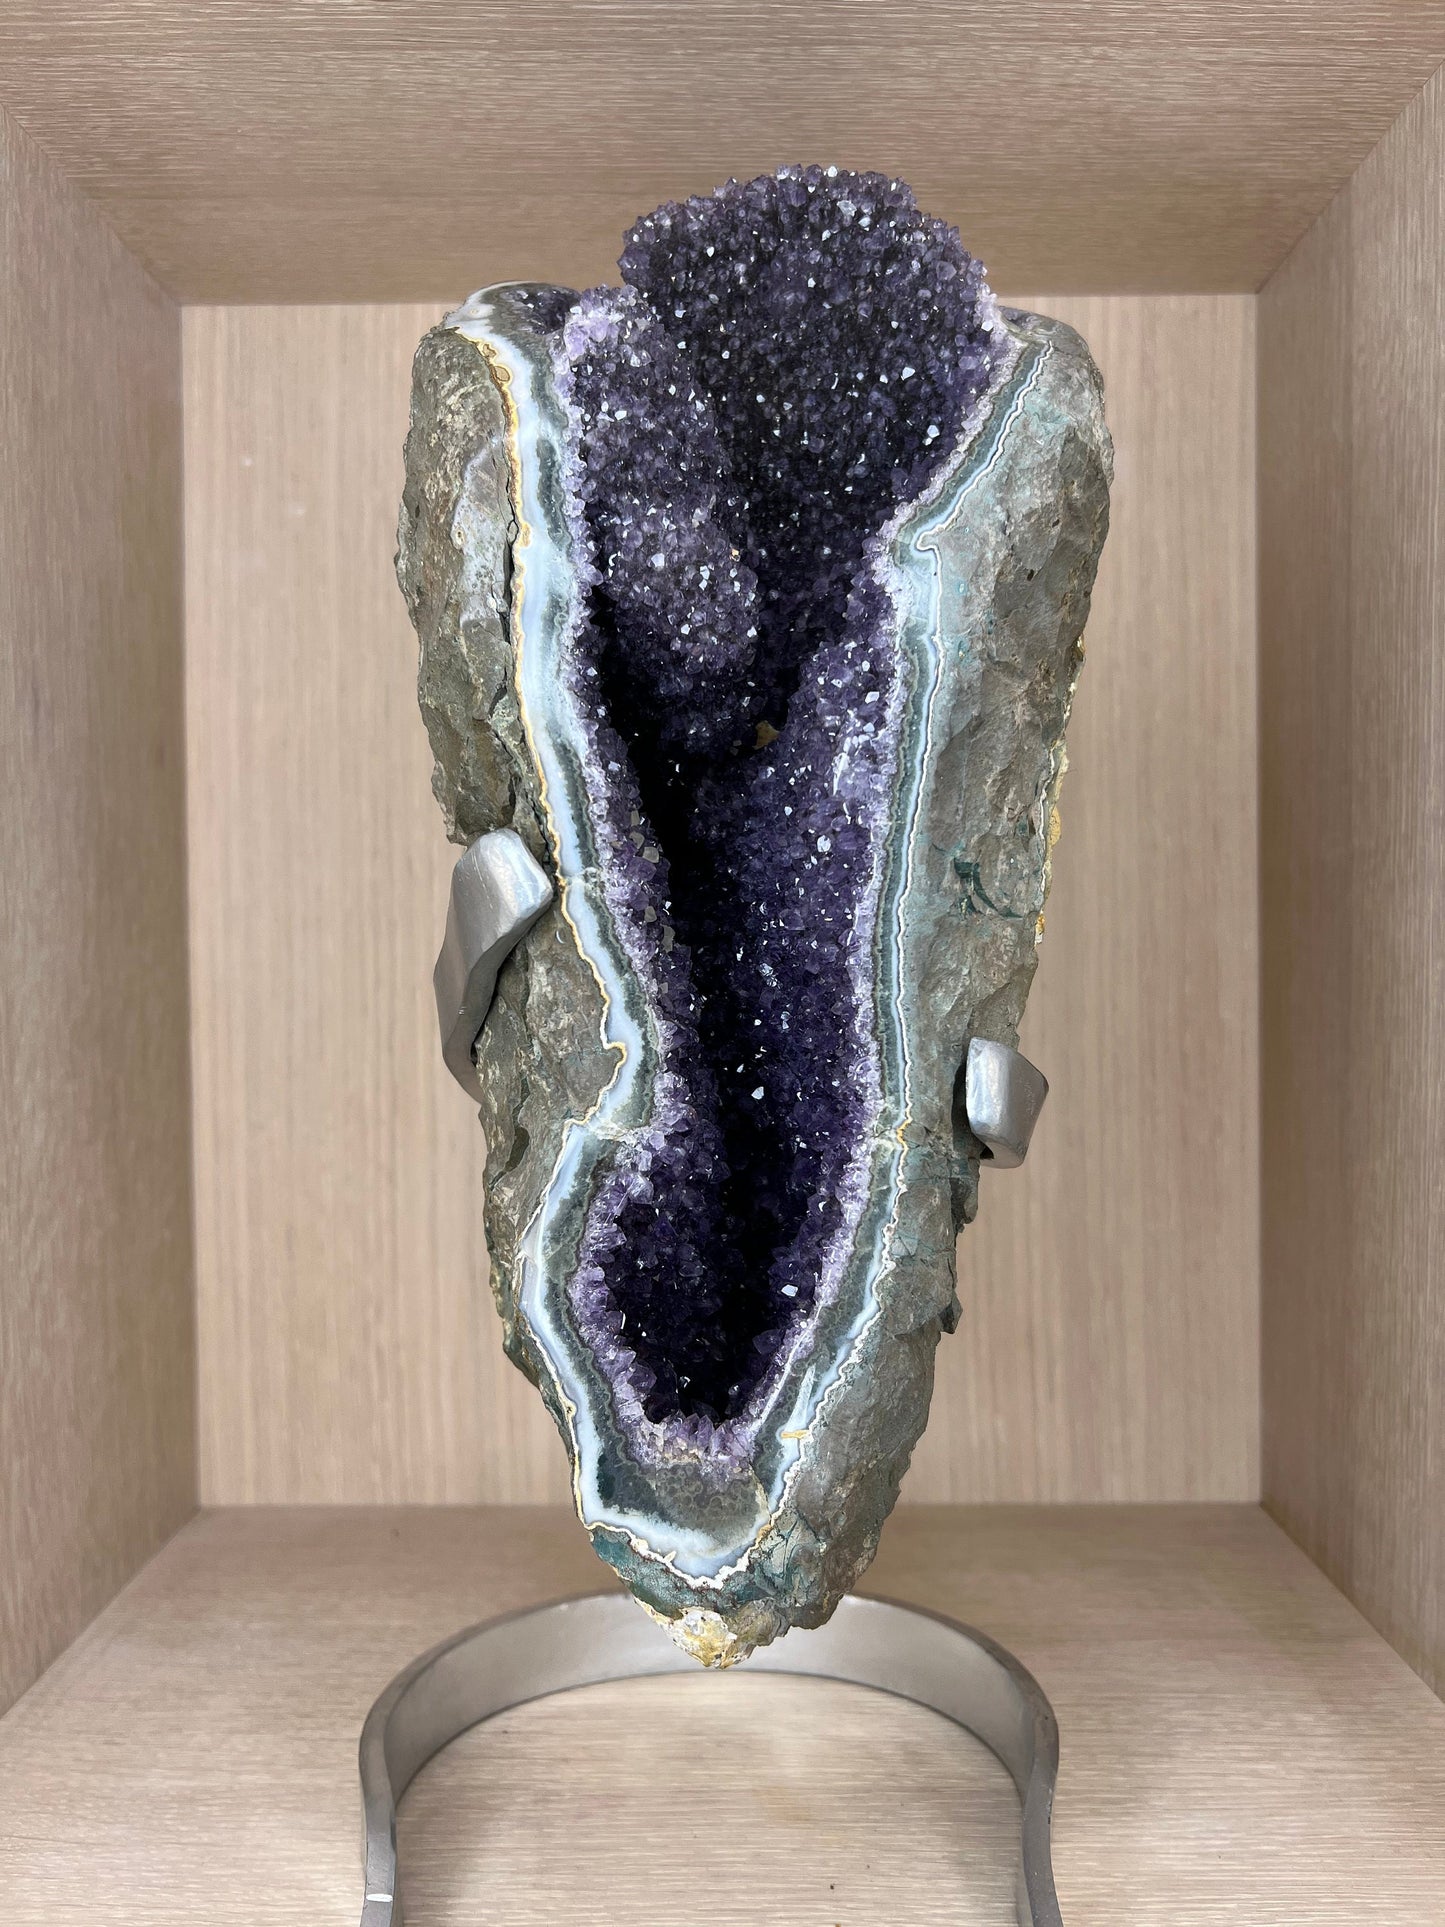 Large Amethyst Geode Crystal Natural self-standing rock for tabletop home decor healing stone 10.25lb